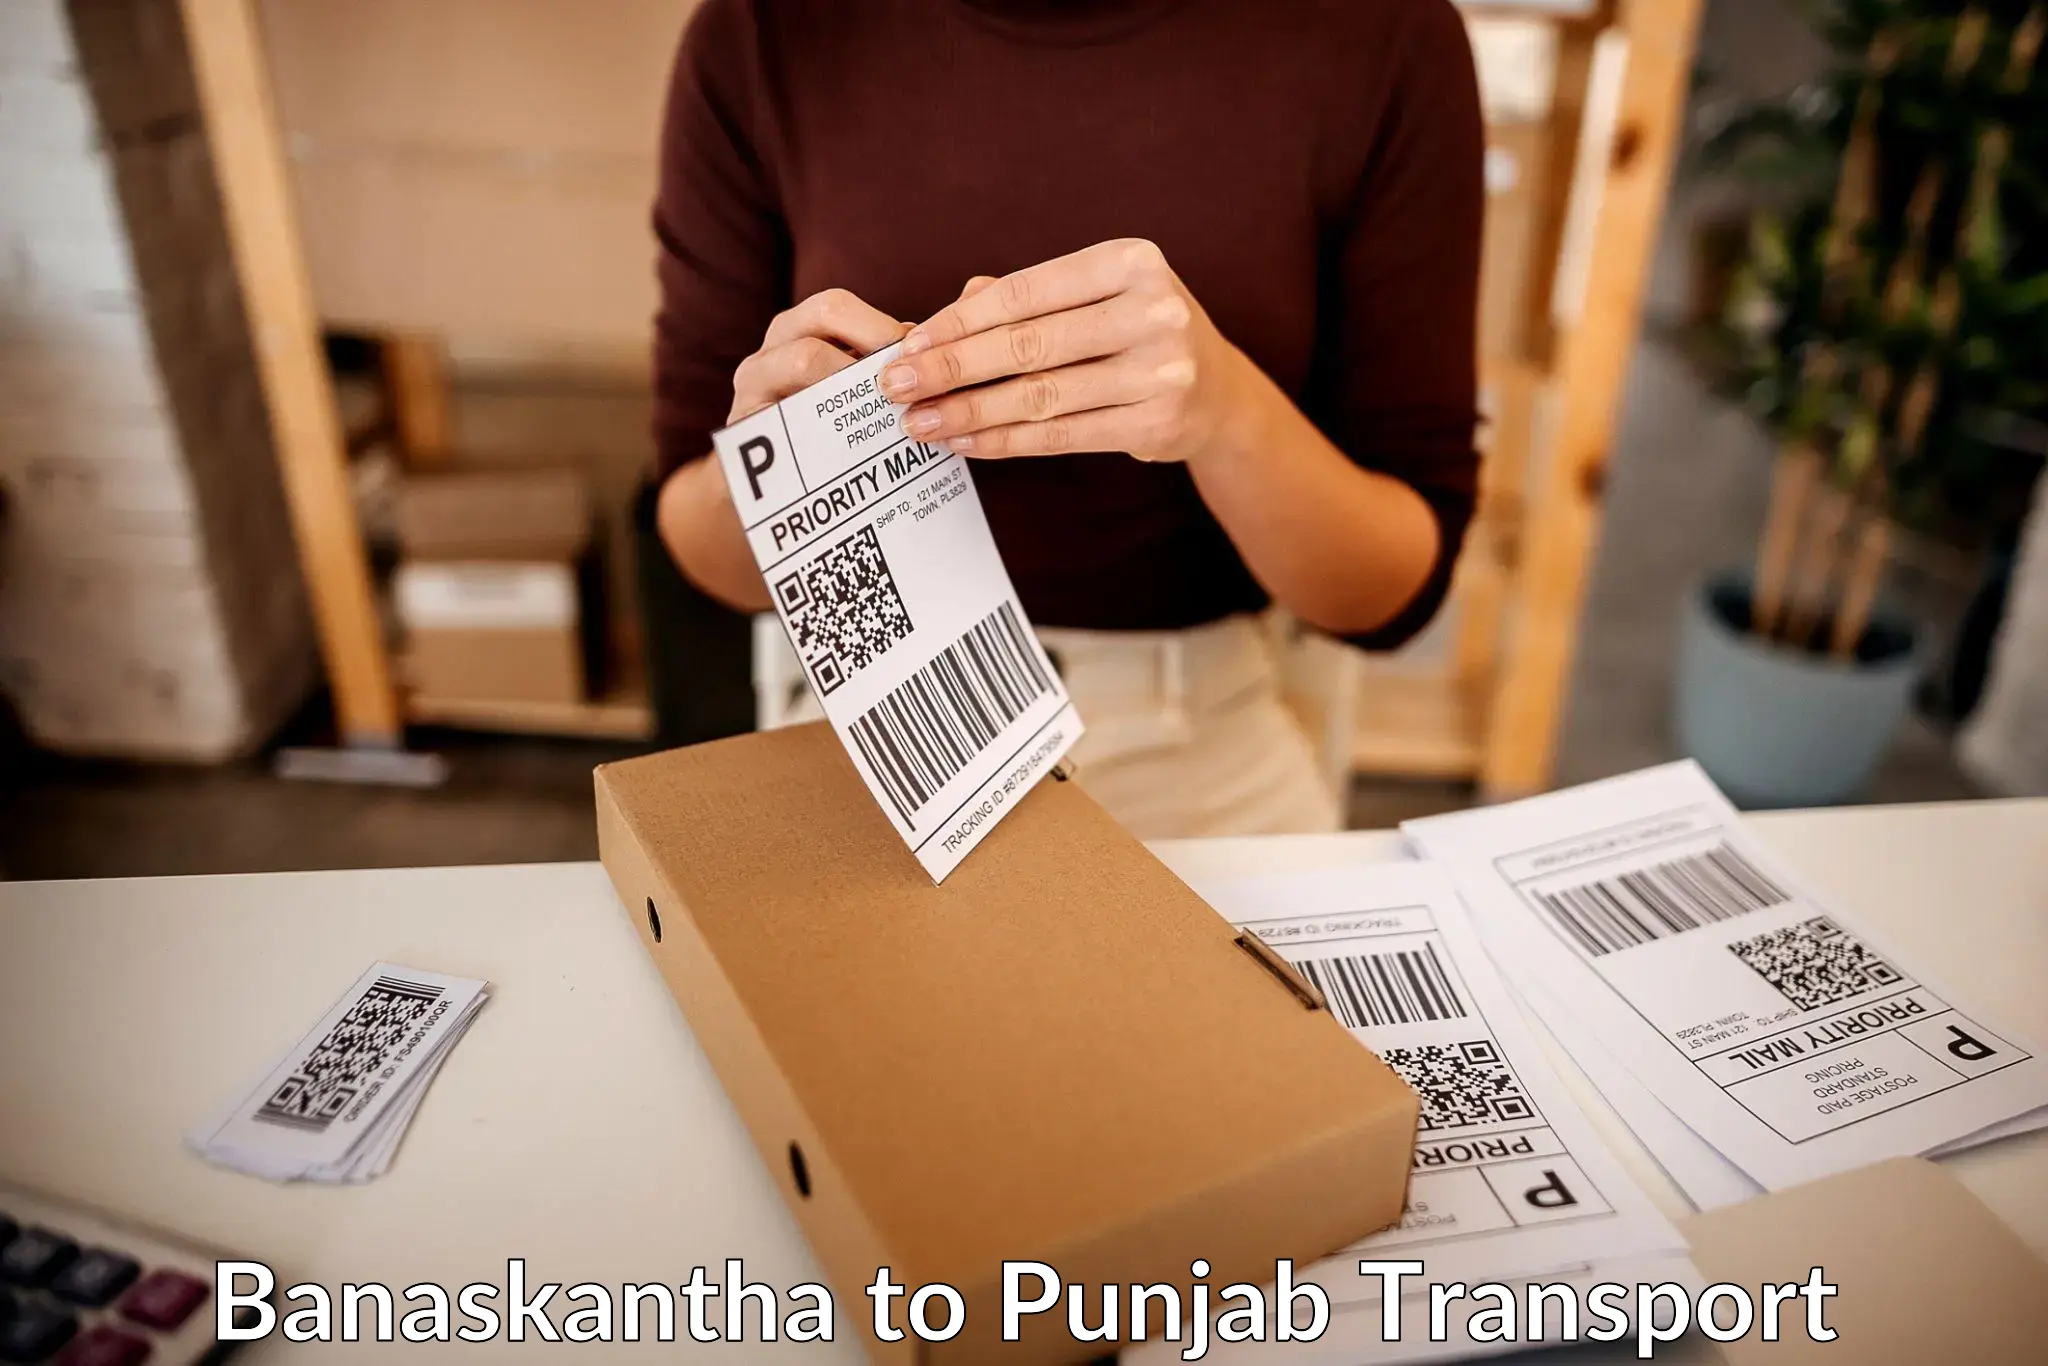 Cargo transport services Banaskantha to Thapar Institute of Engineering and Technology Patiala